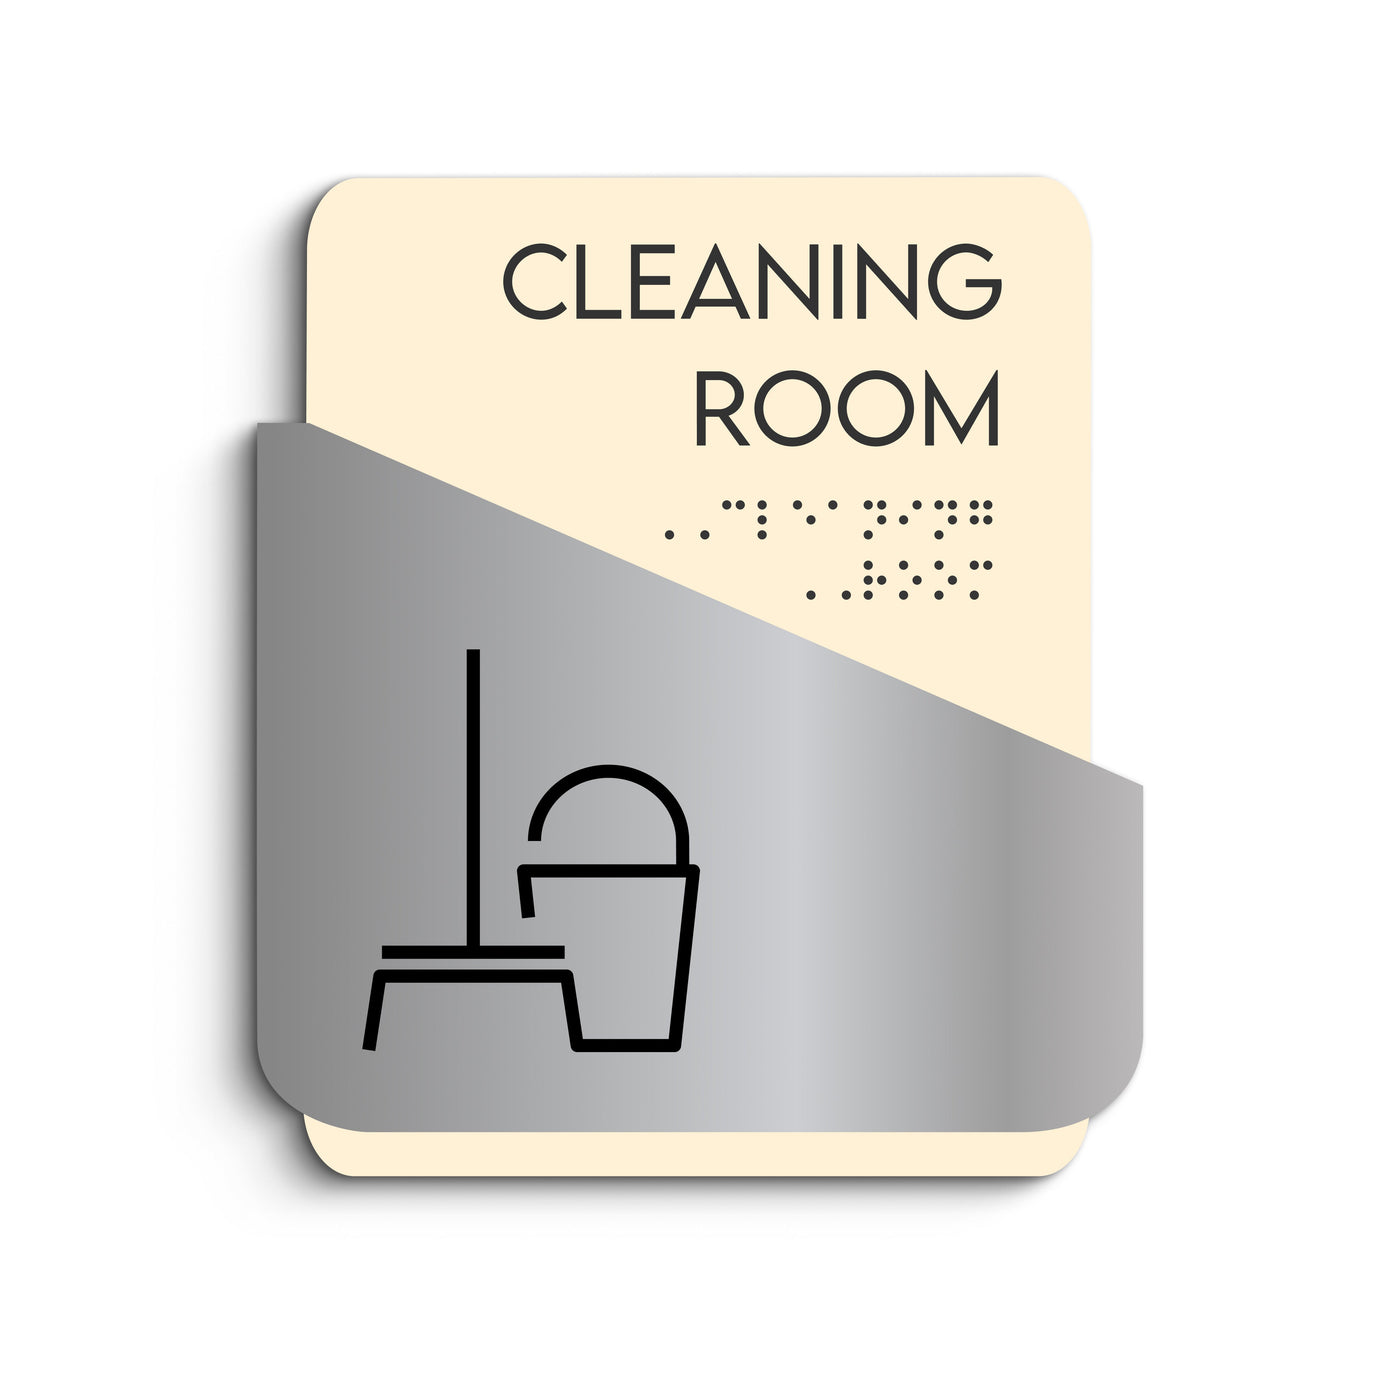 Information Signs - Cleaning Room Signage "Downhill" Design